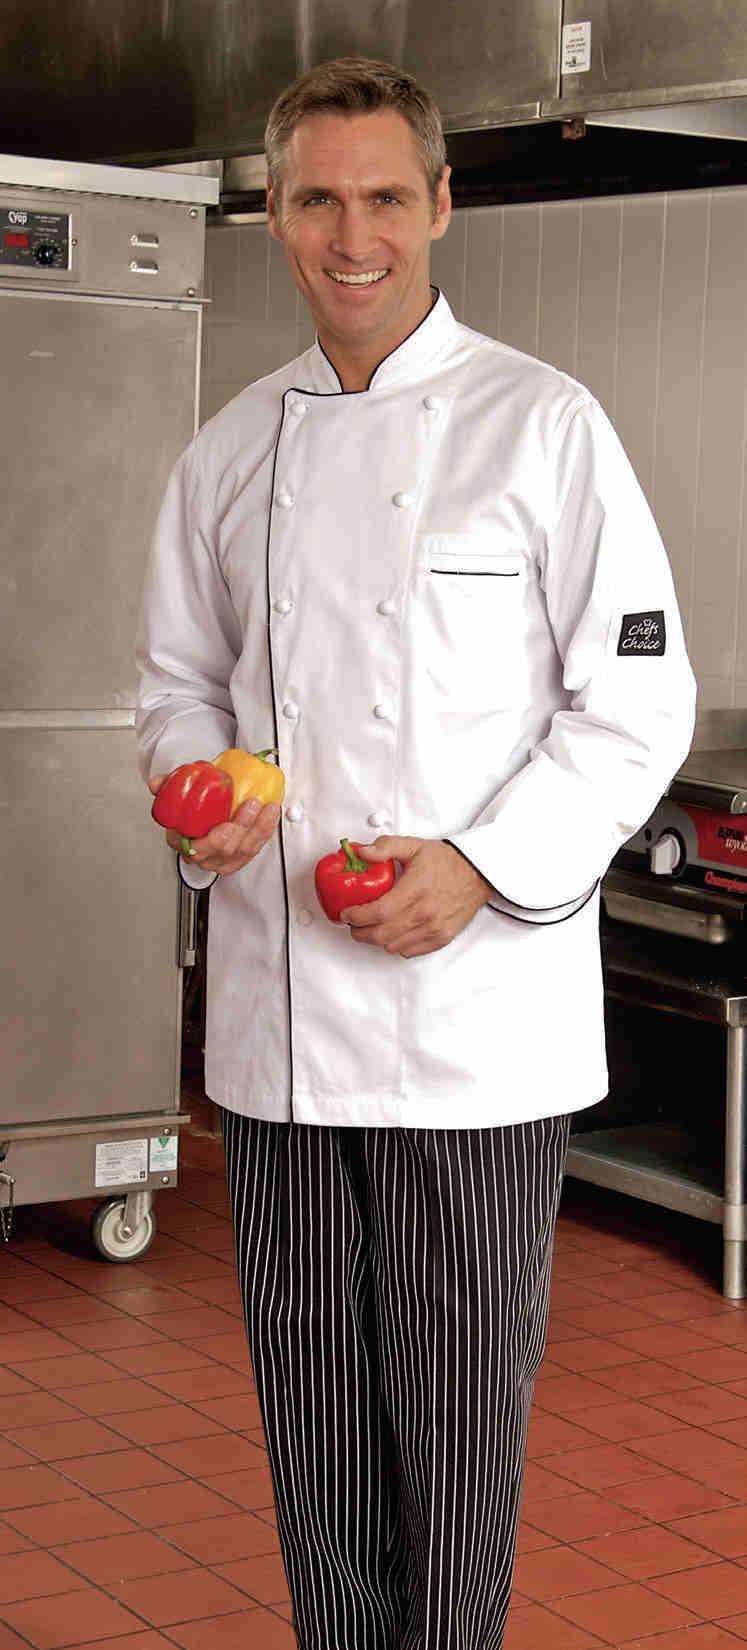 CHEF COATS Master Chef Coat A classic Asian inspired style with thin black piping